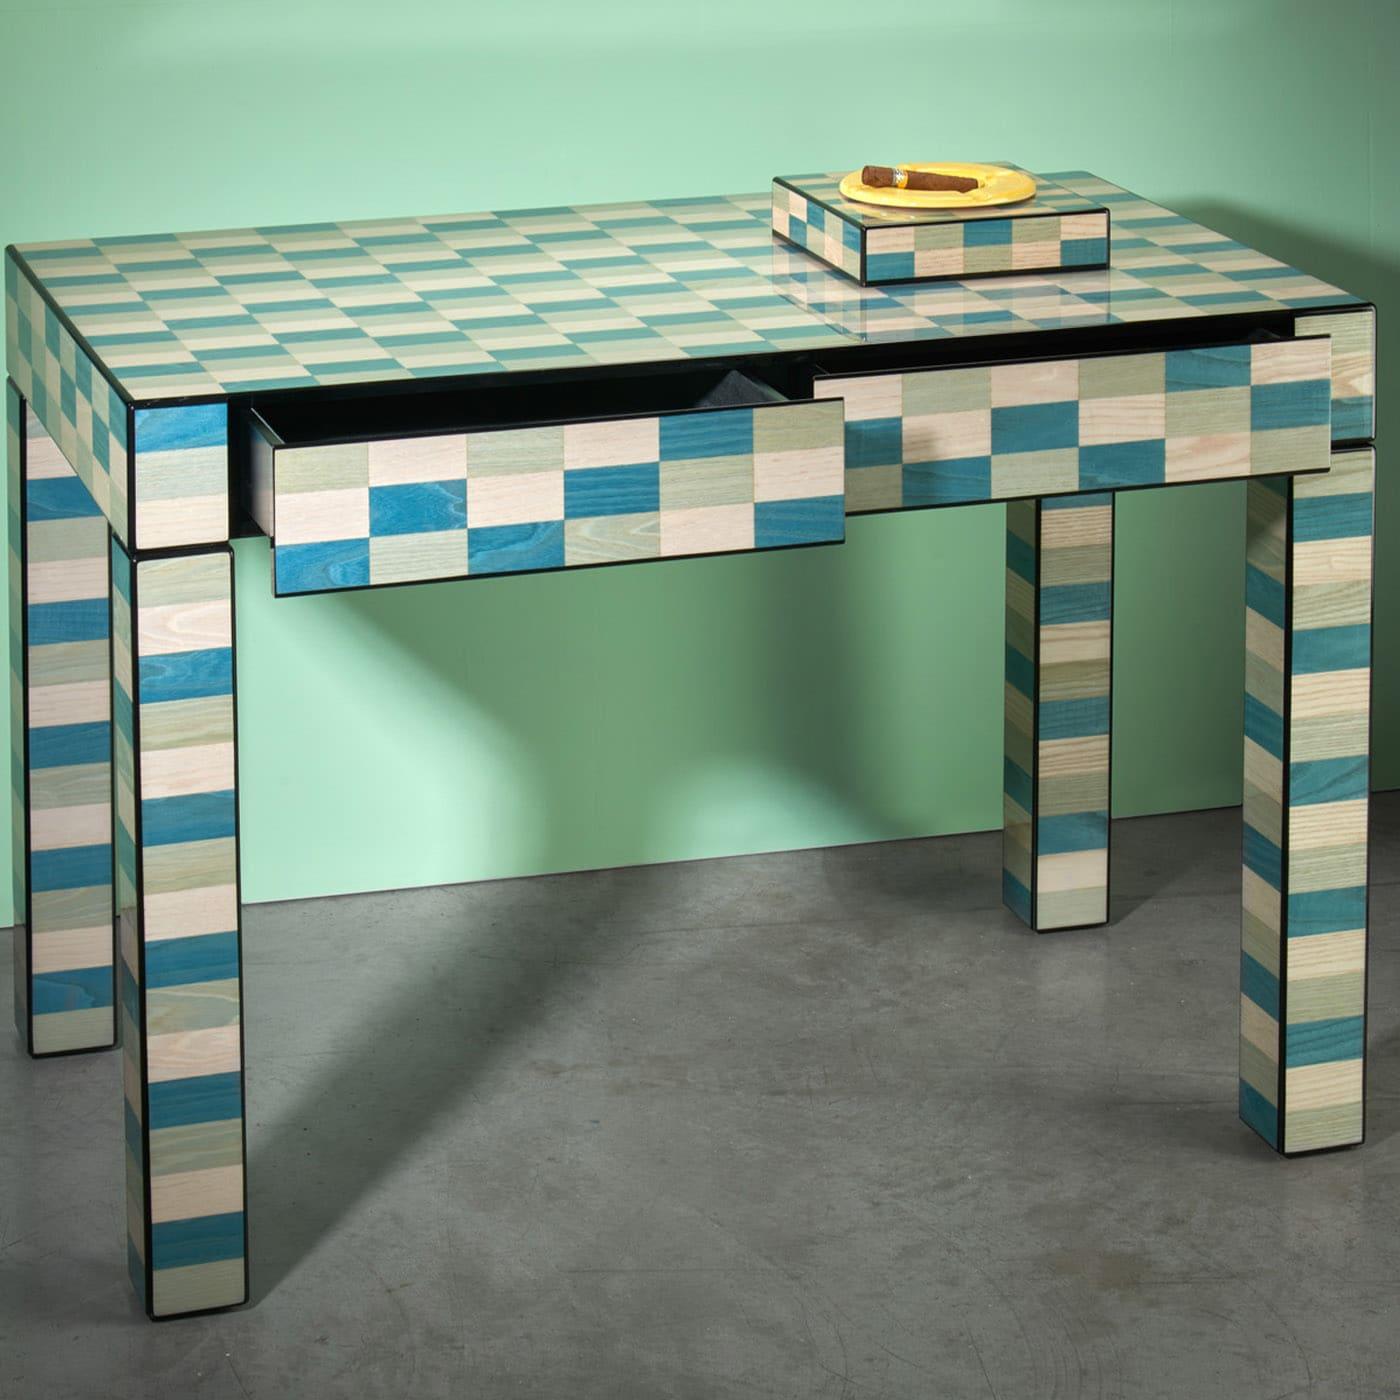 Showcasing natural grains through the polished and mirror-brushed finishes of the rectangular wooden shape, this writing desk boasts a handmade inlay work painted by hand in a delicate palette inspired by the colors of the Venice Lagoon. It features